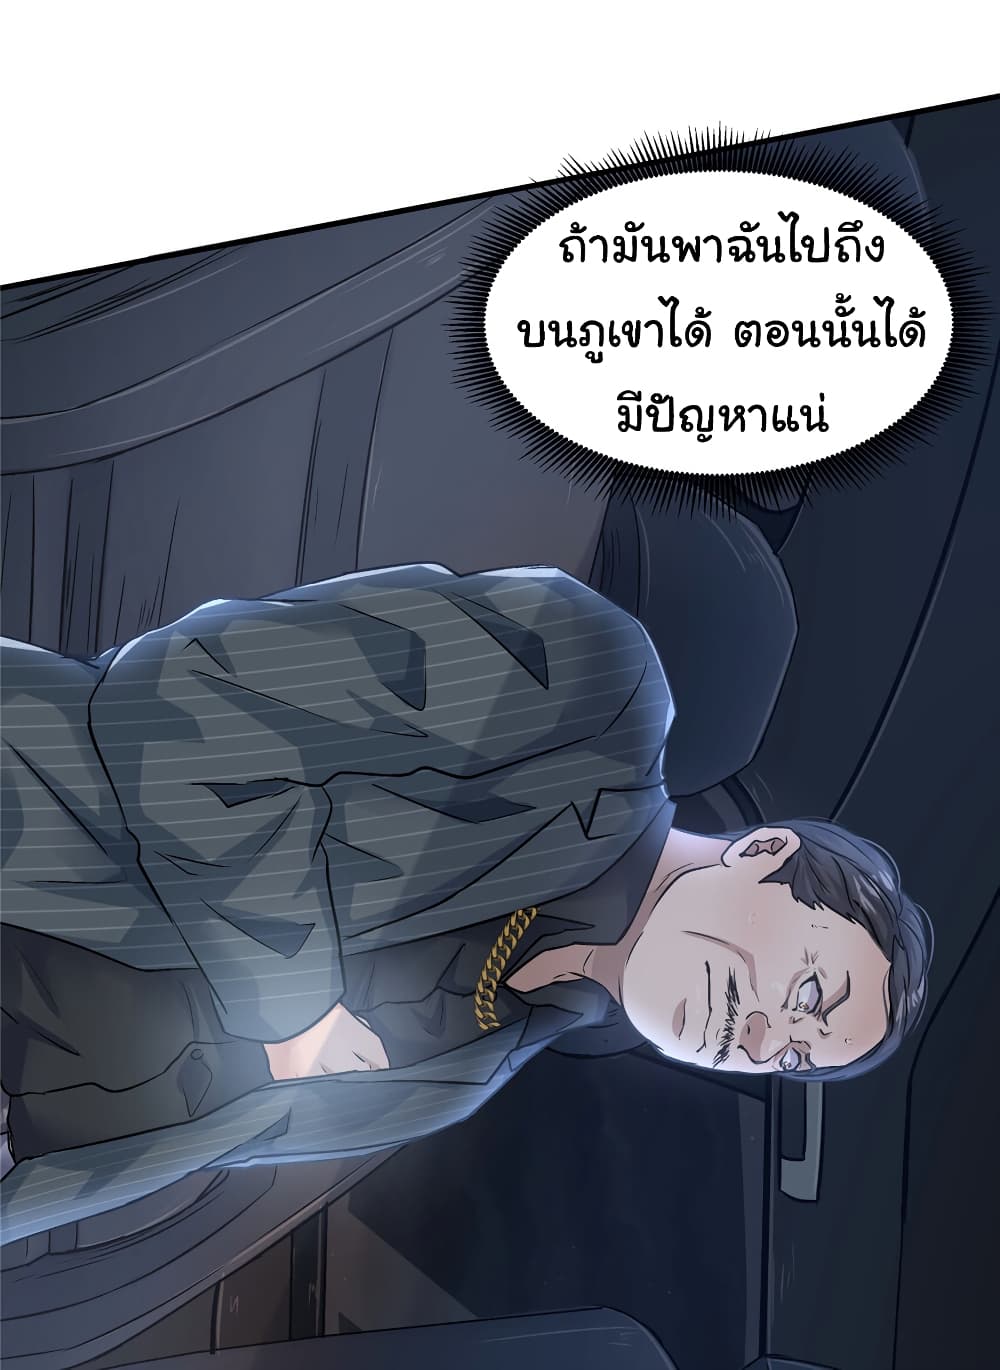 Live Steadily, Donโ€t Wave เธ•เธญเธเธ—เธตเน 34 (27)